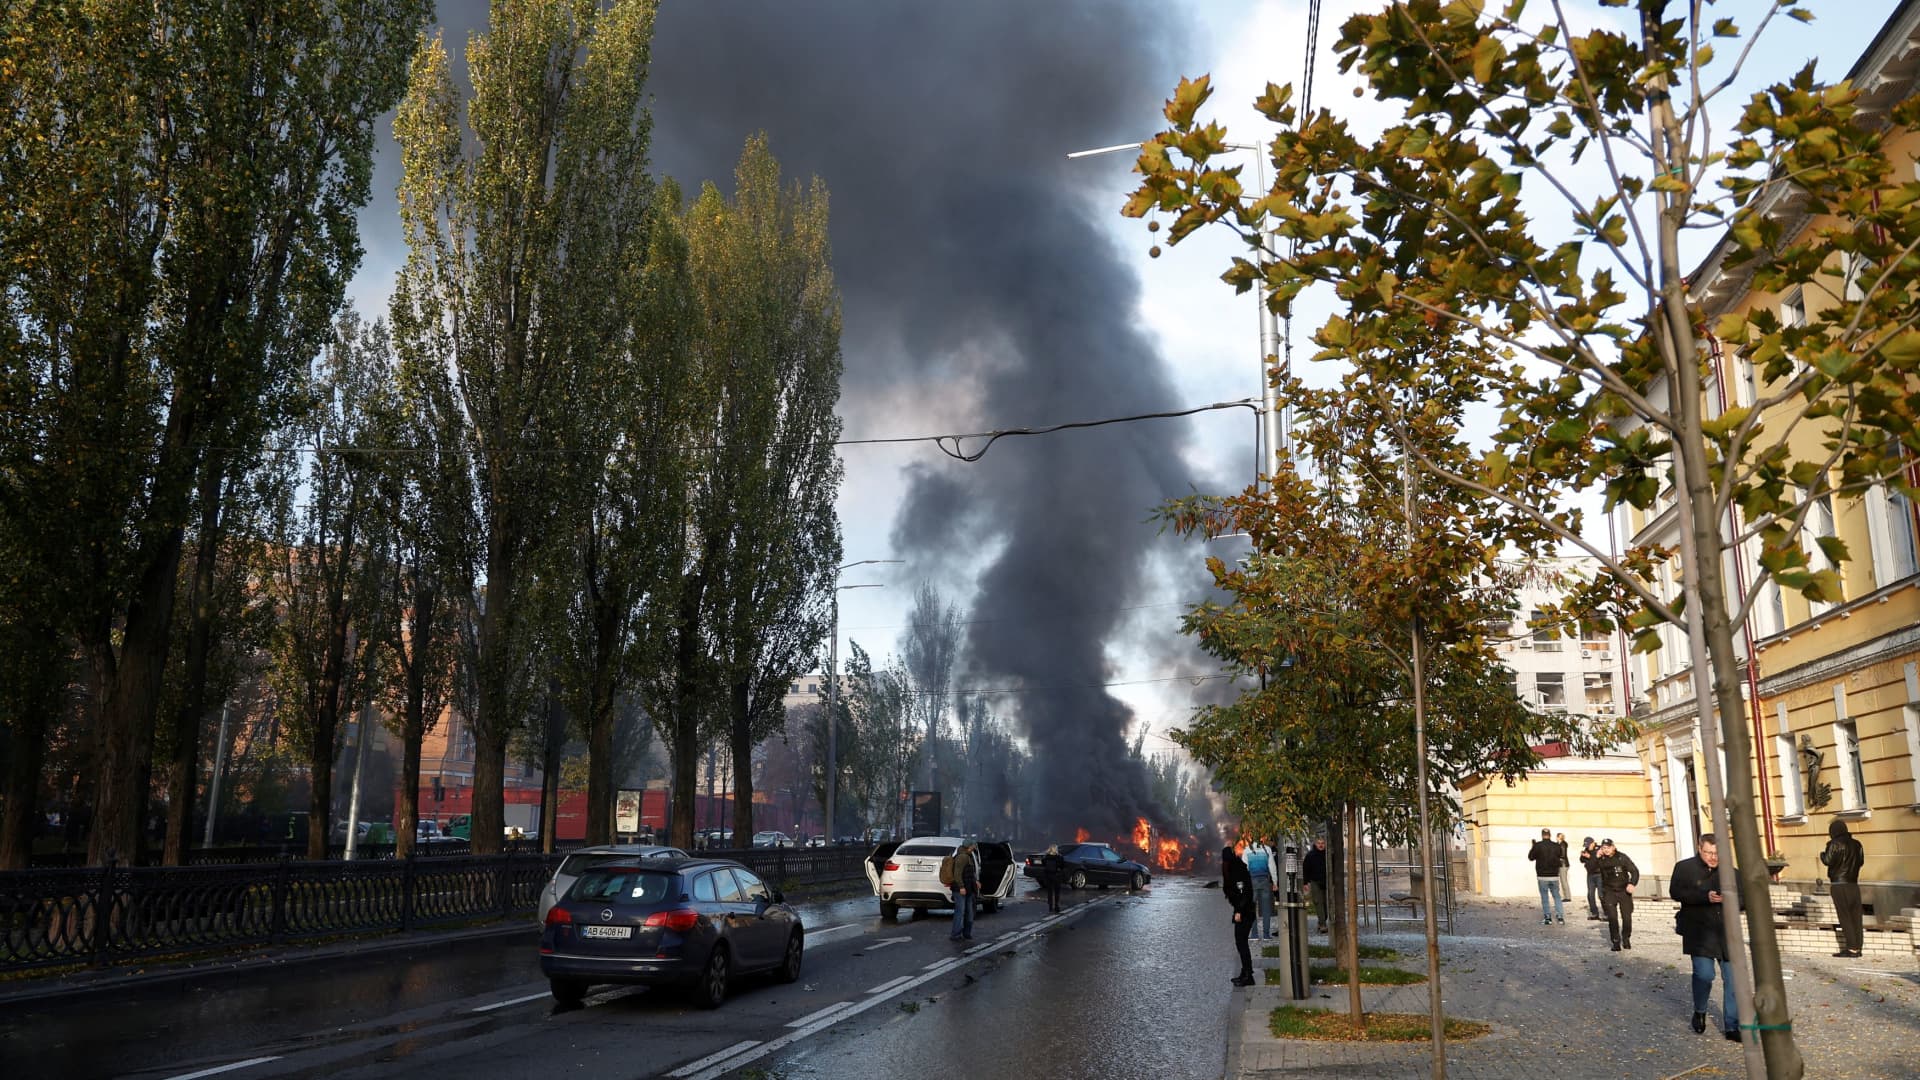 Cars are seen on fire after Russian missile strikes, as Russia's attack continues, in Kyiv, Ukraine October 10, 2022.